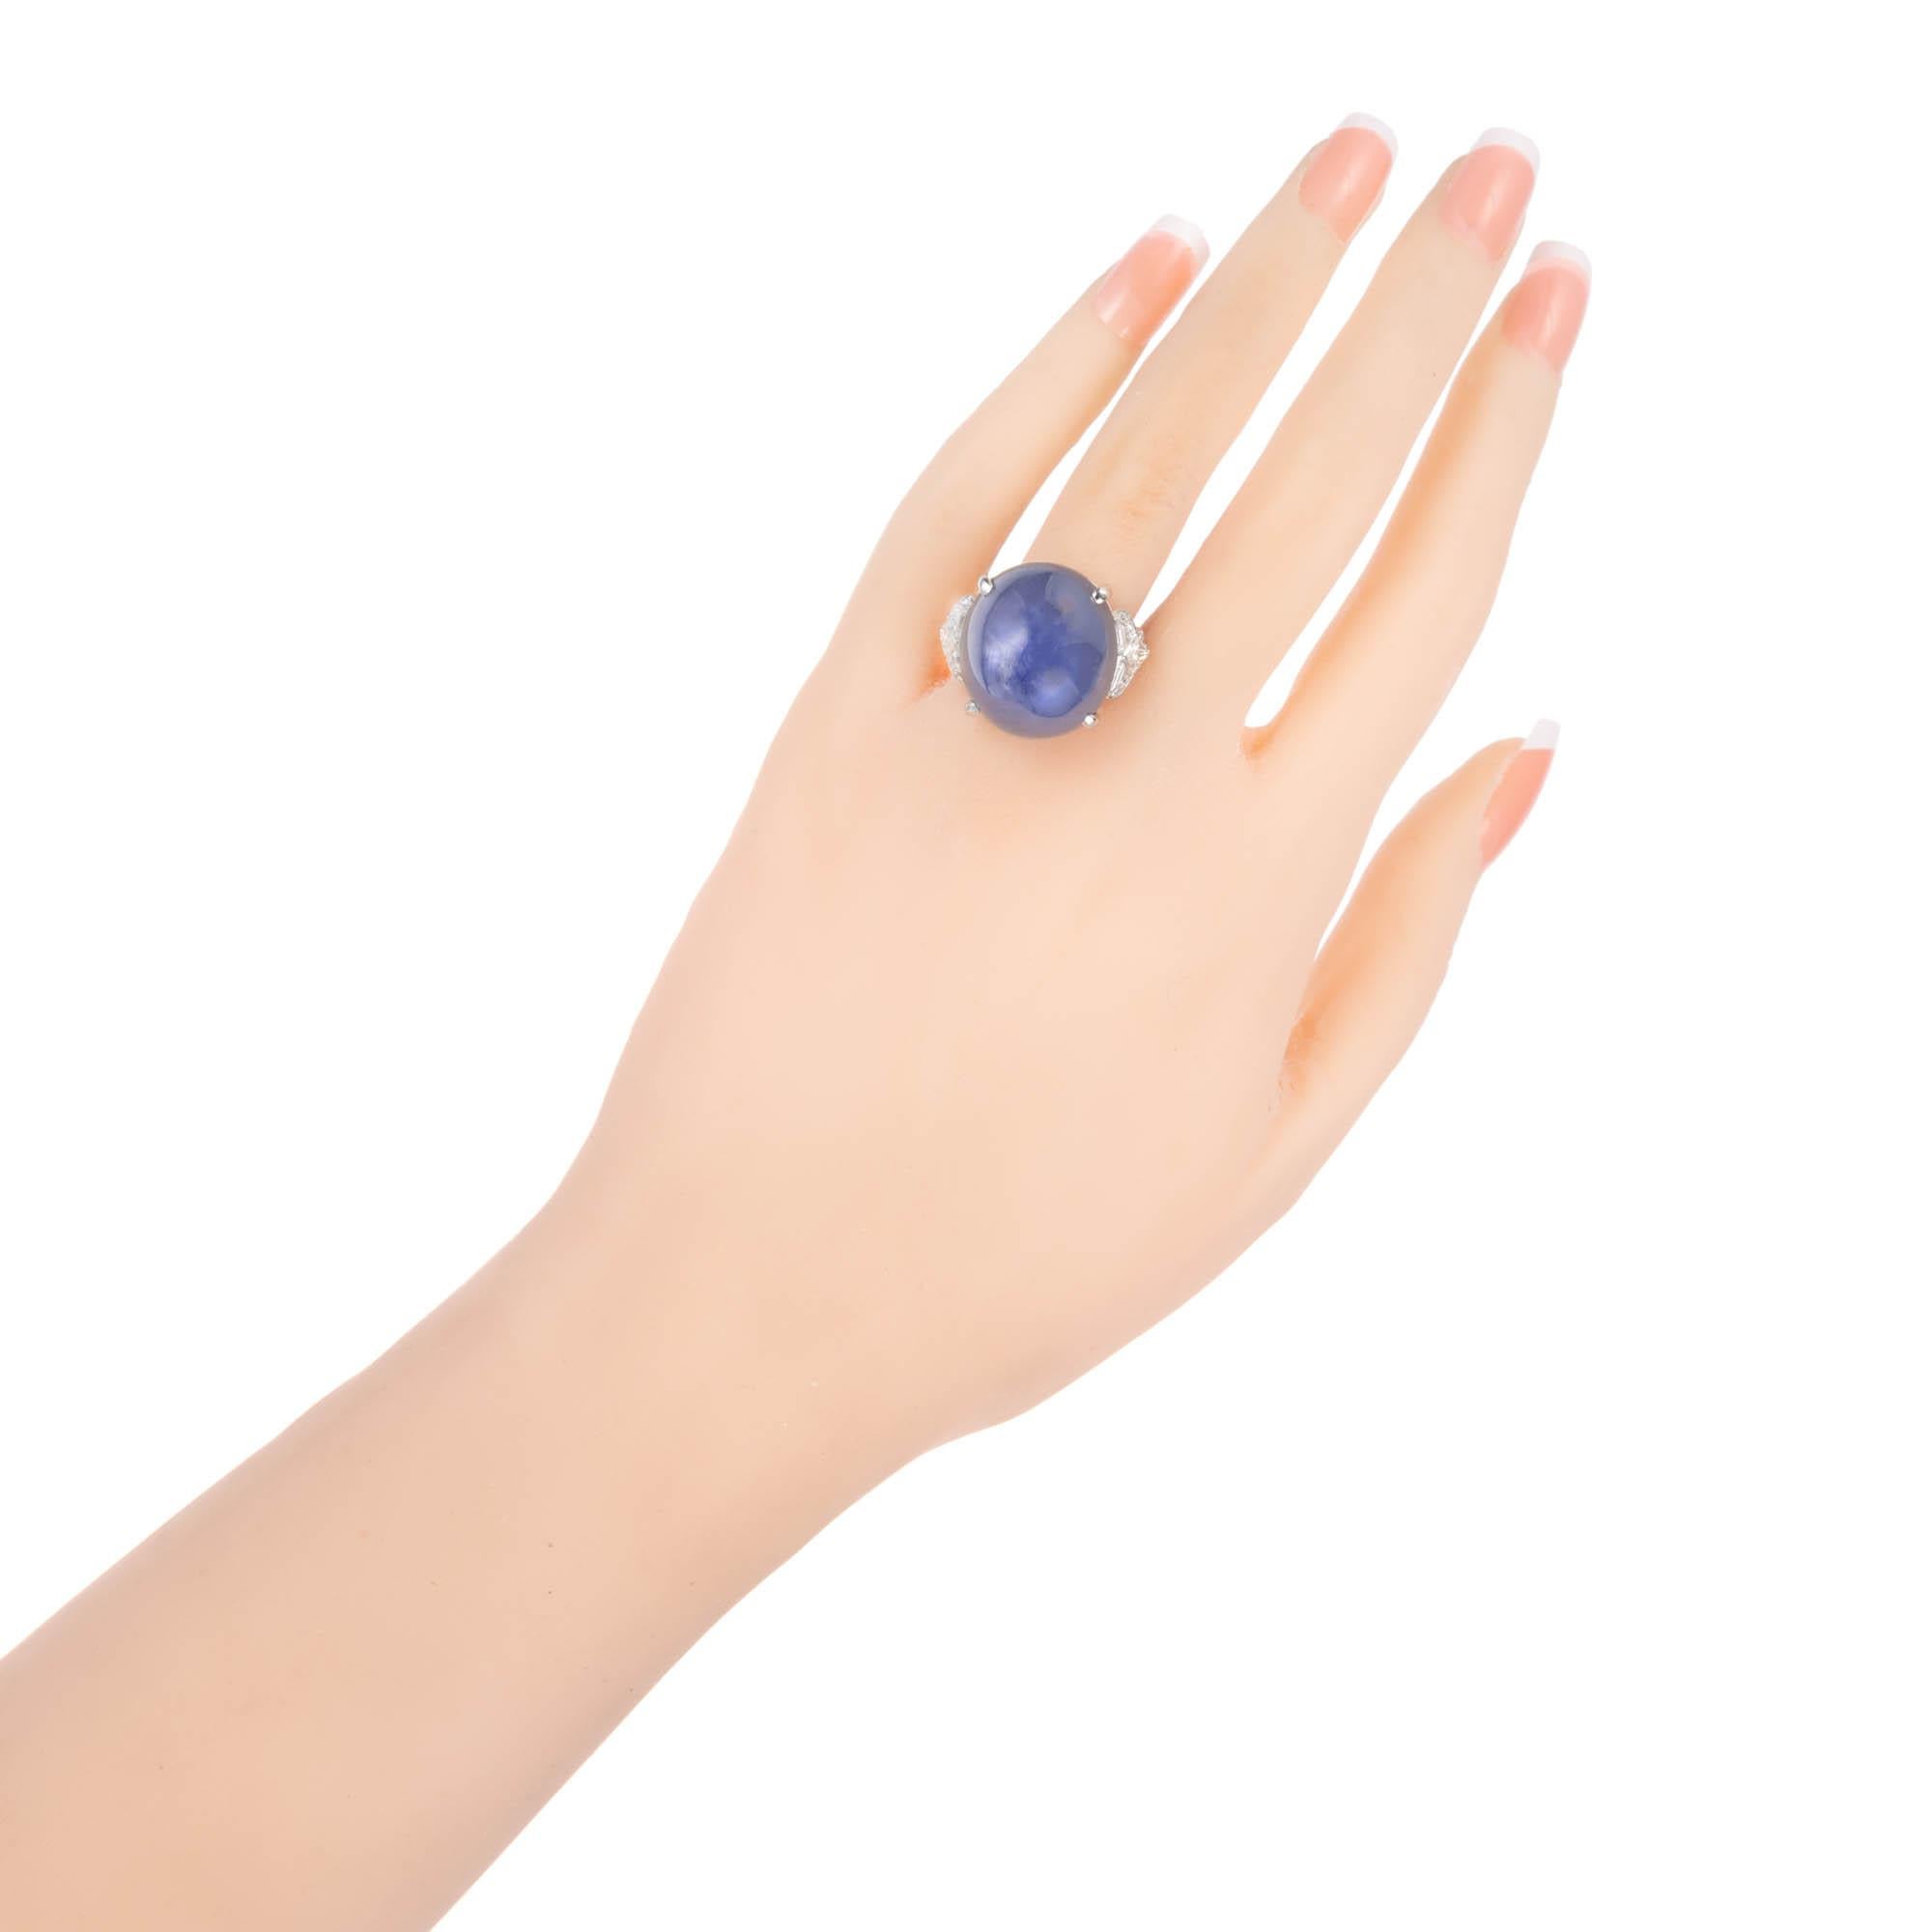 GIA Certified 45.18 Carat Star Sapphire Diamond Platinum Cocktail Ring In Good Condition For Sale In Stamford, CT